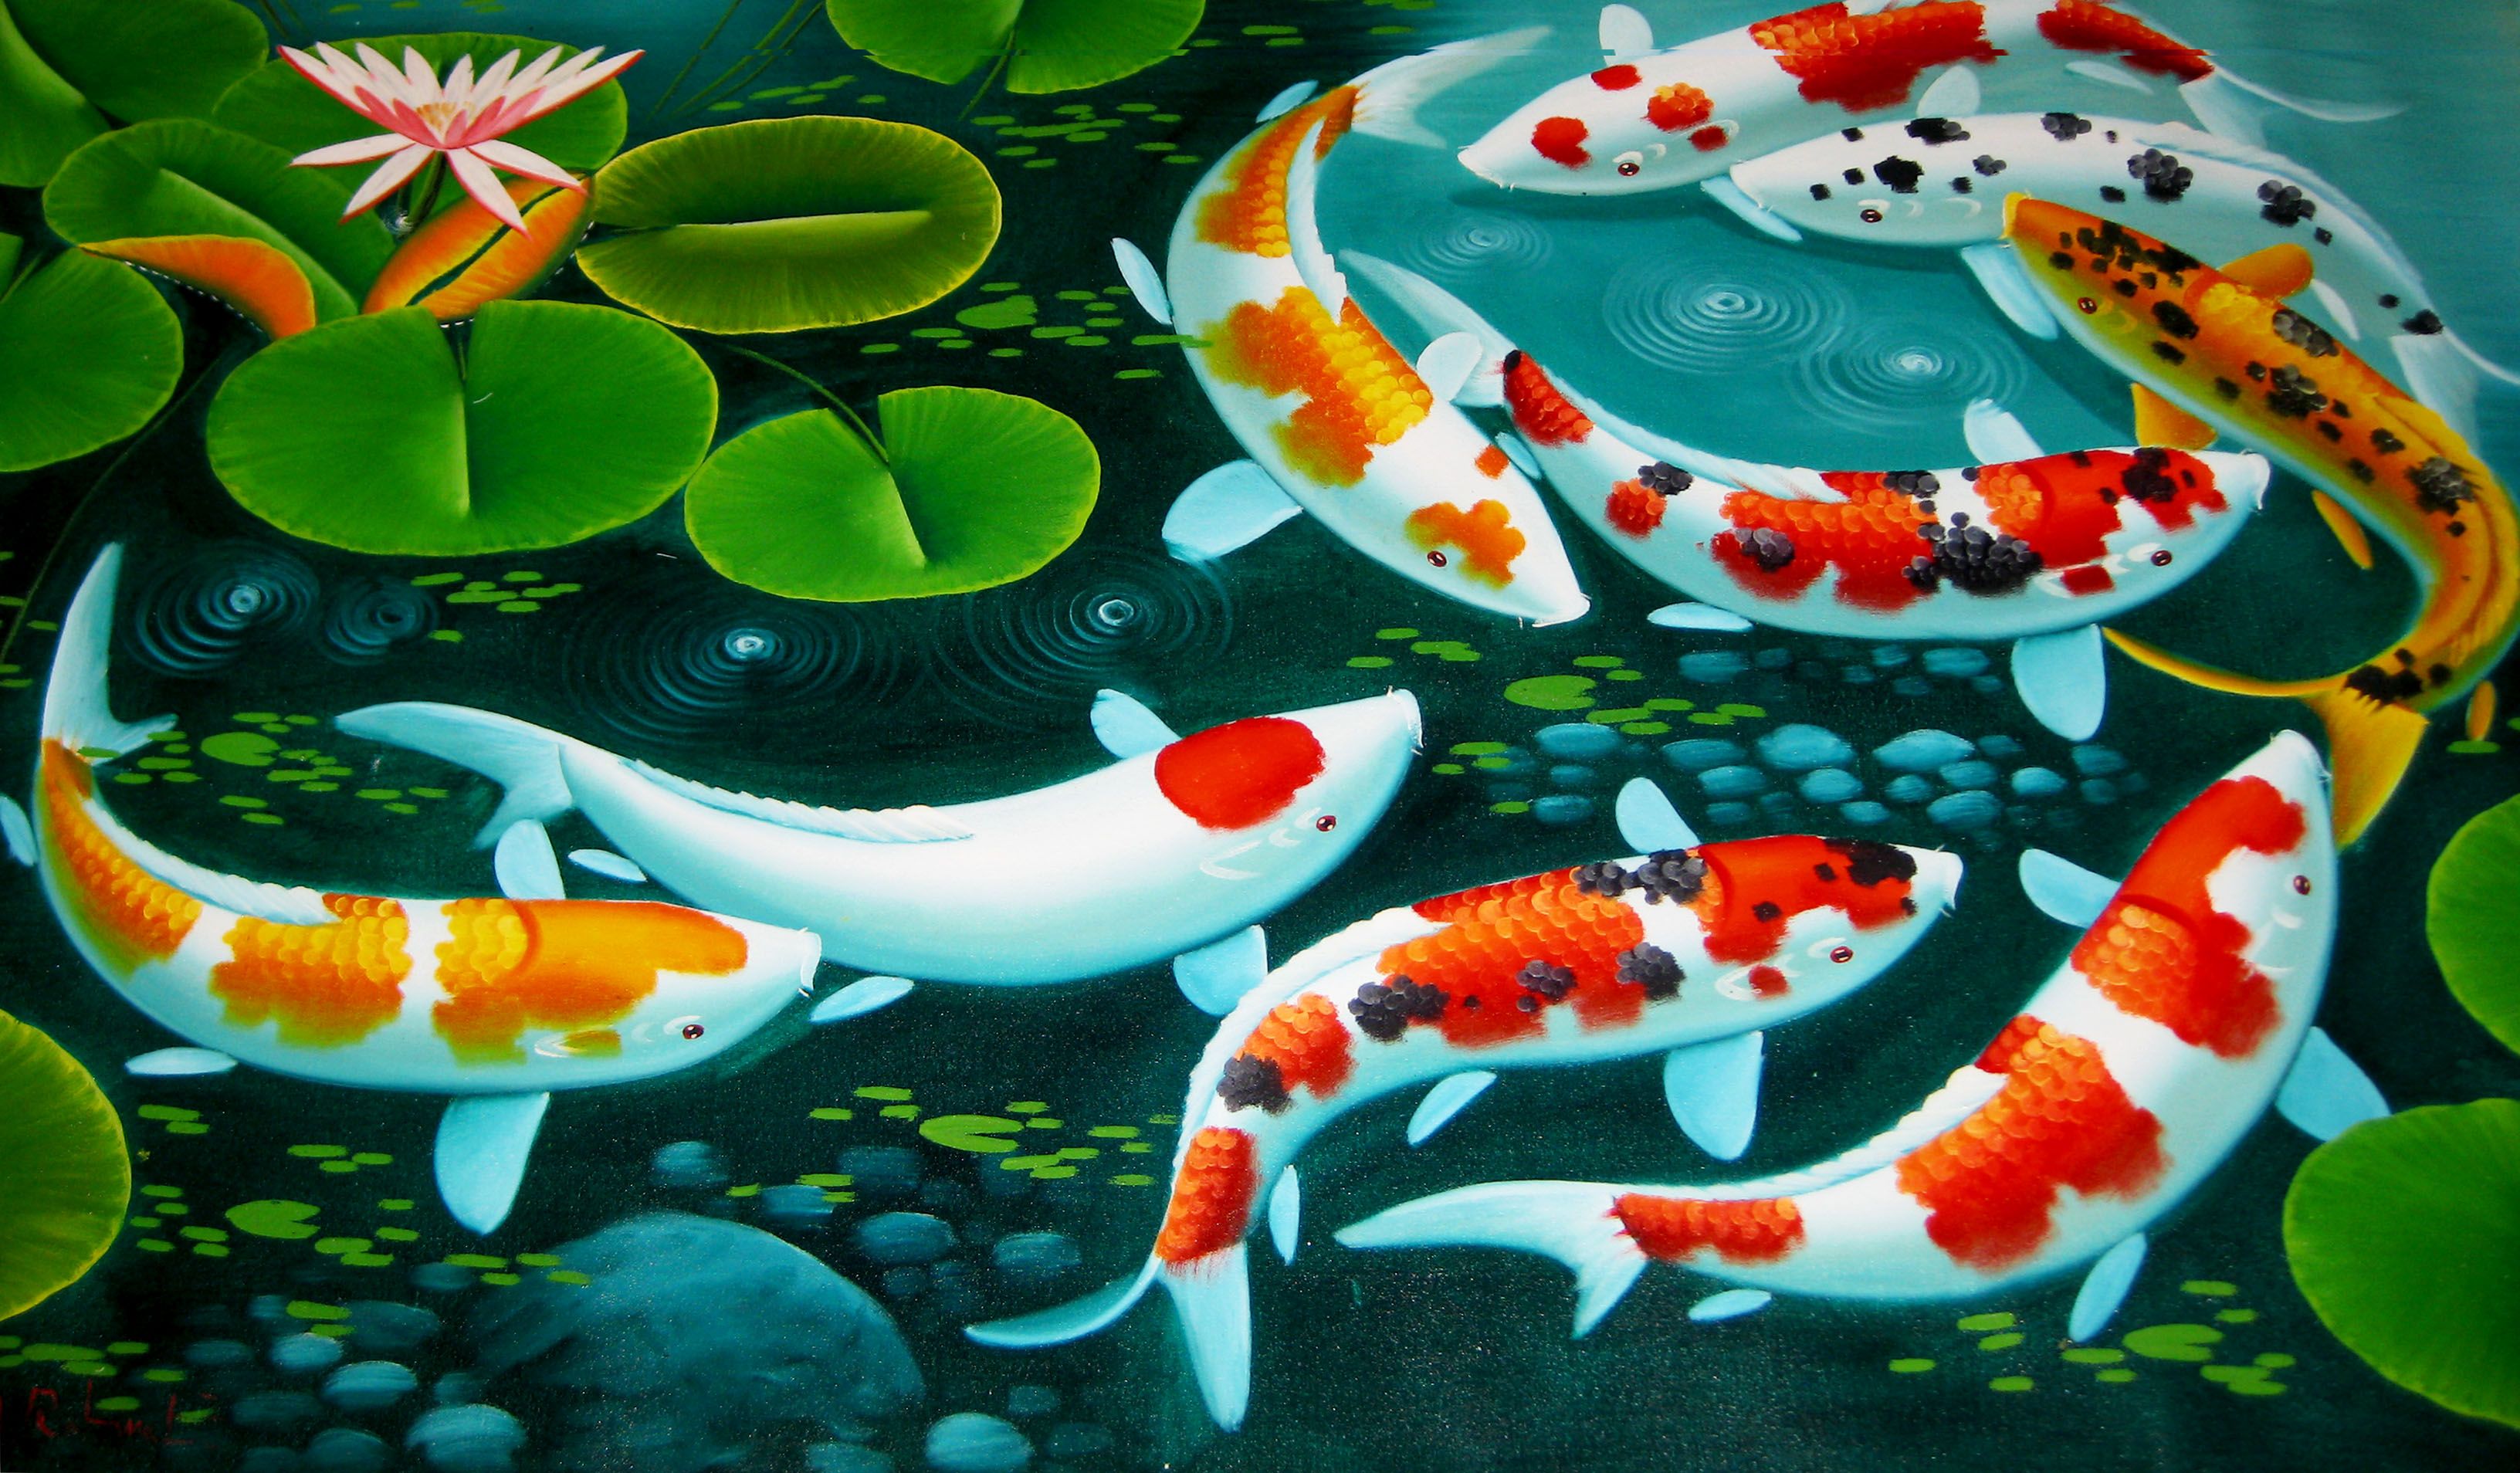 A painting of a pond with koi fish swimming in it - Koi fish